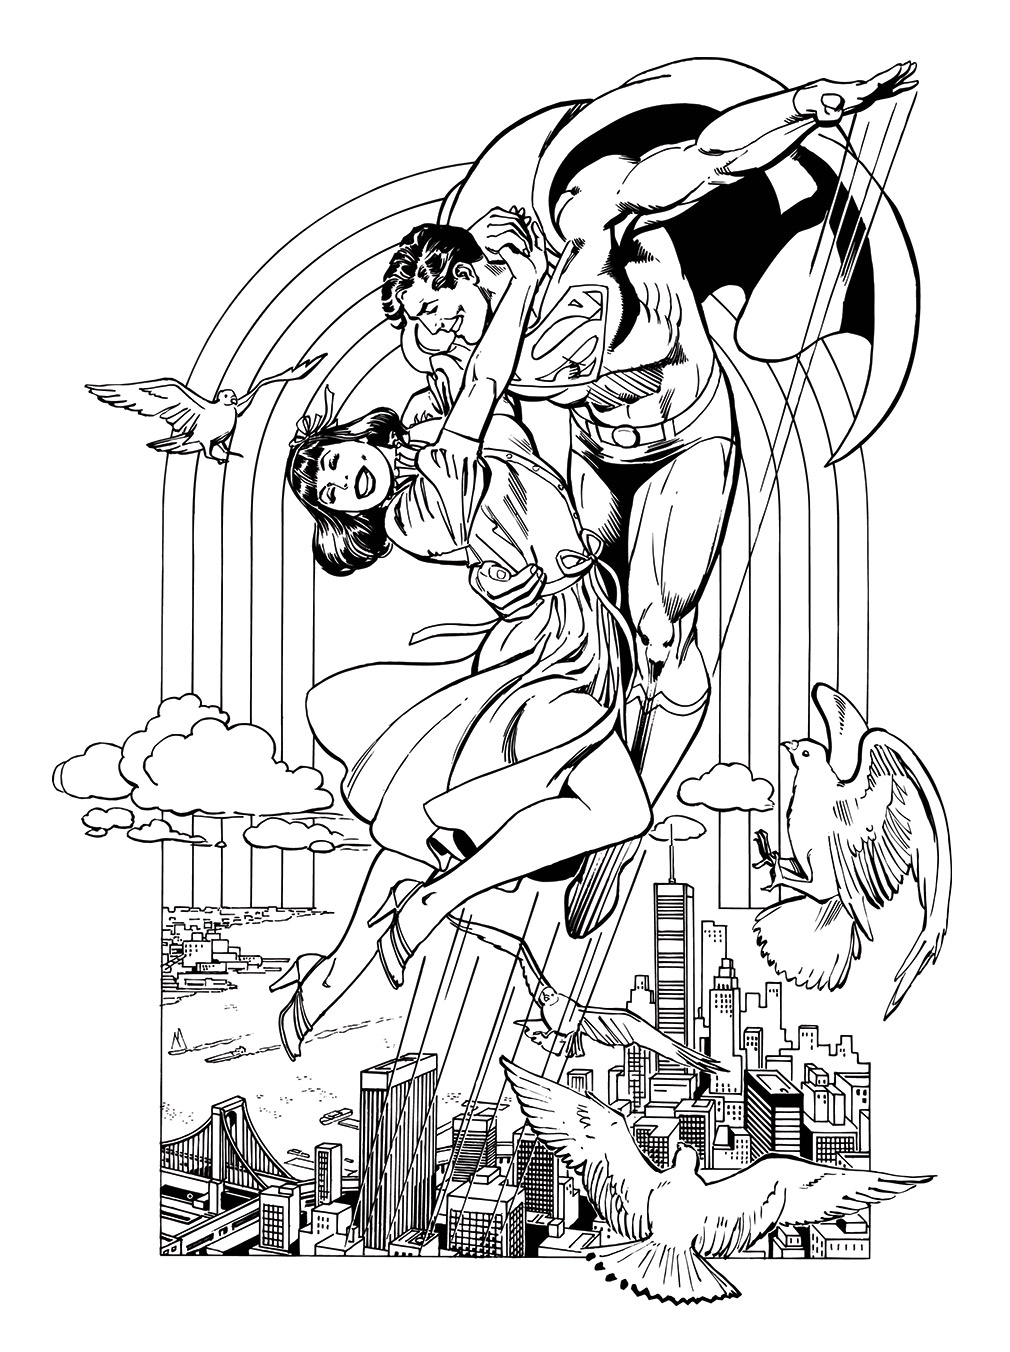 Superman and Lois over Metropolis by Garcia-Lopez